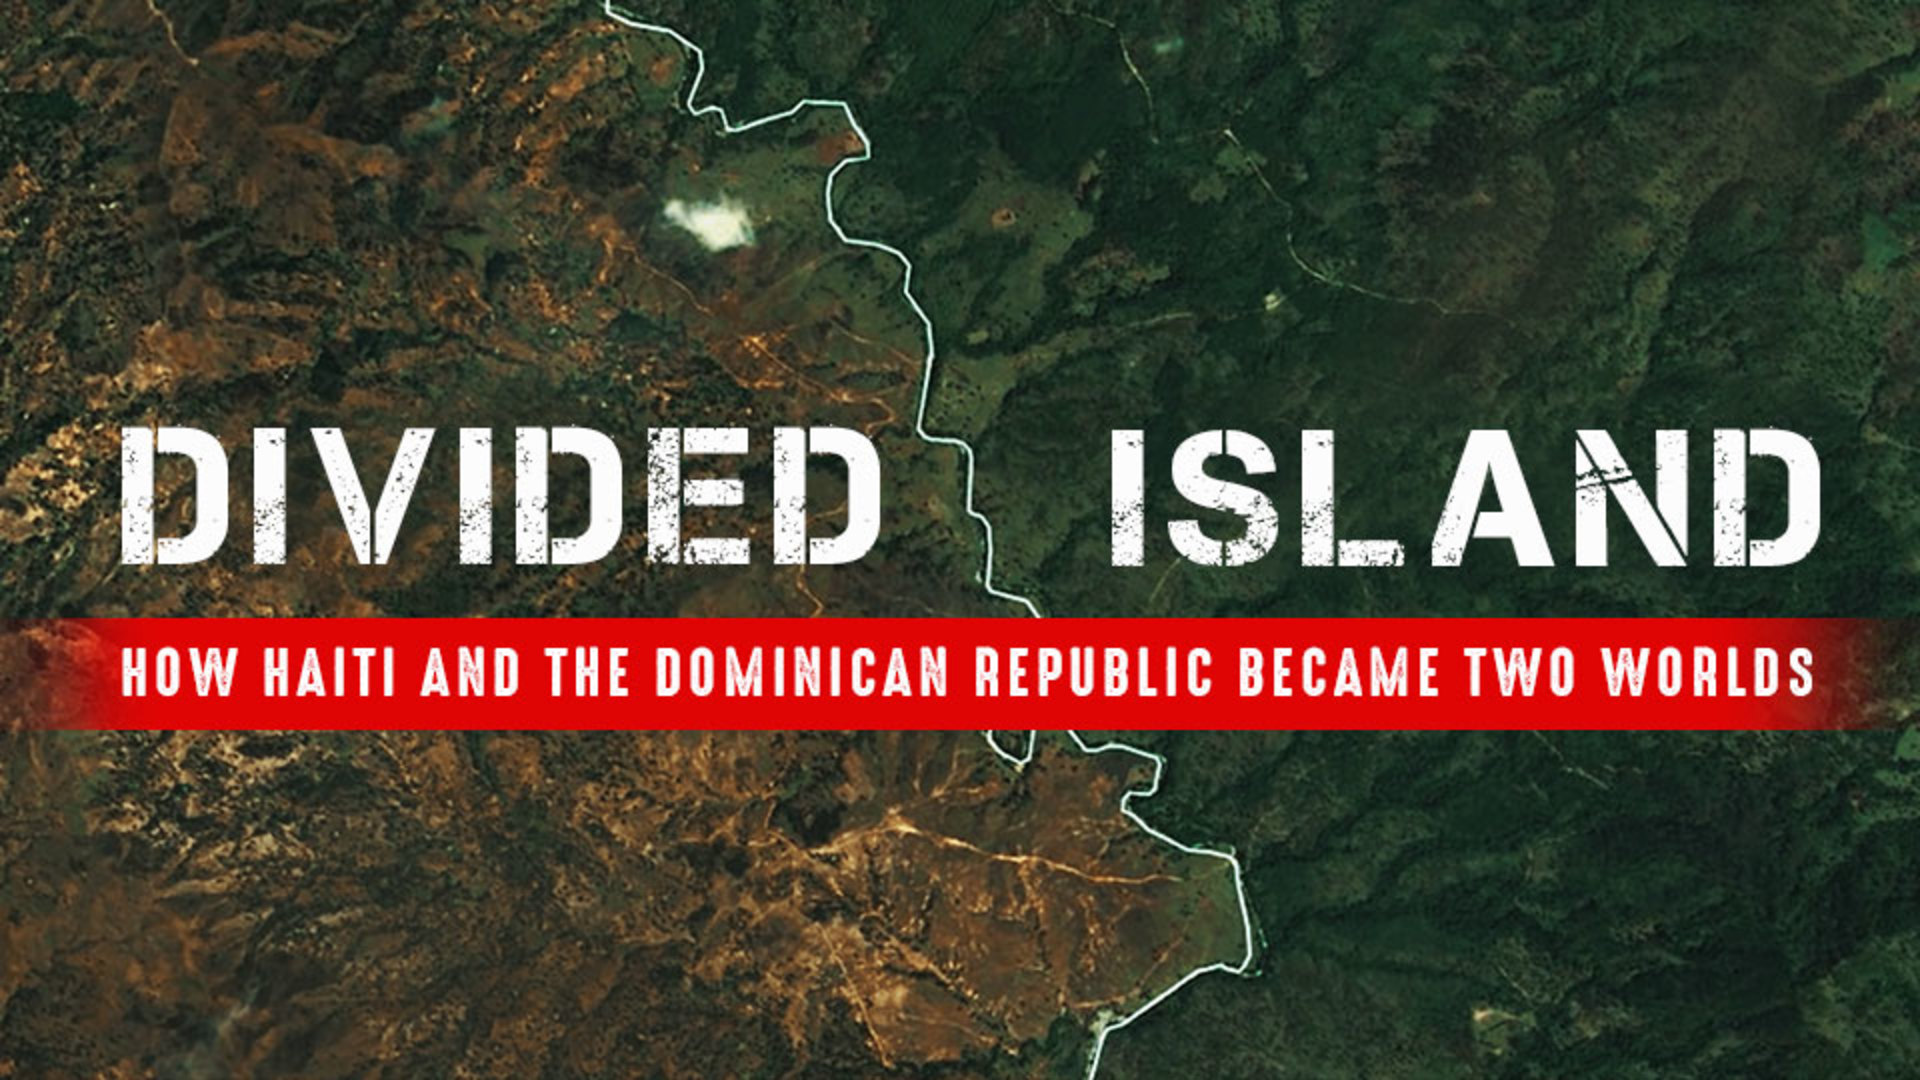 Divided Island: How Haiti and the DR Became Two Worlds